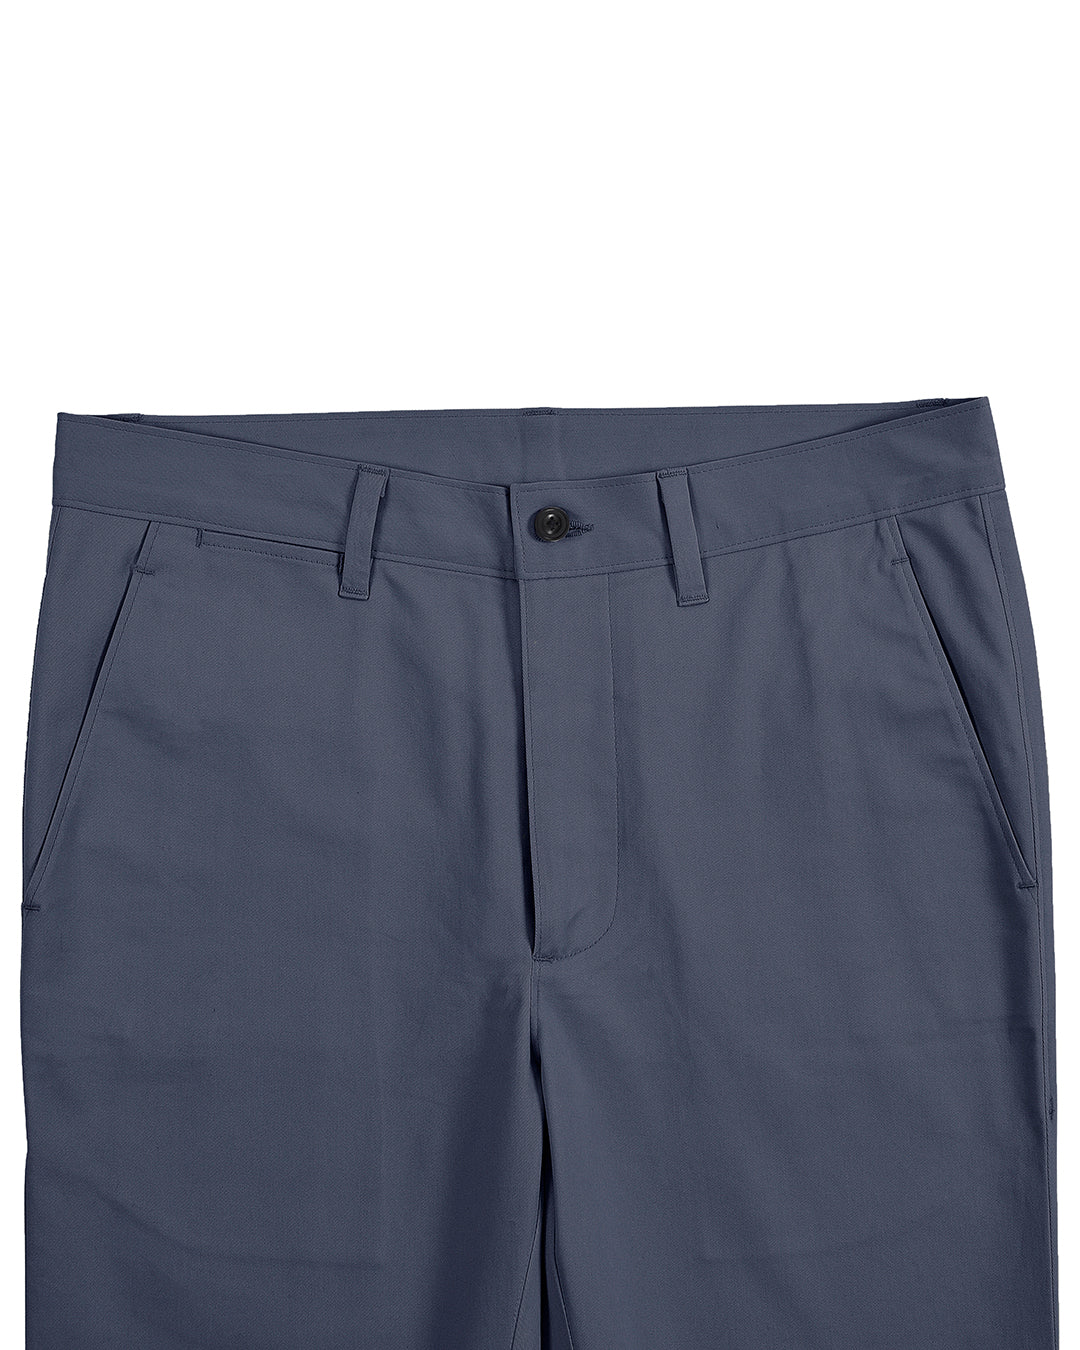 Front view of custom Genoa Chino pants for men by Luxire in grey